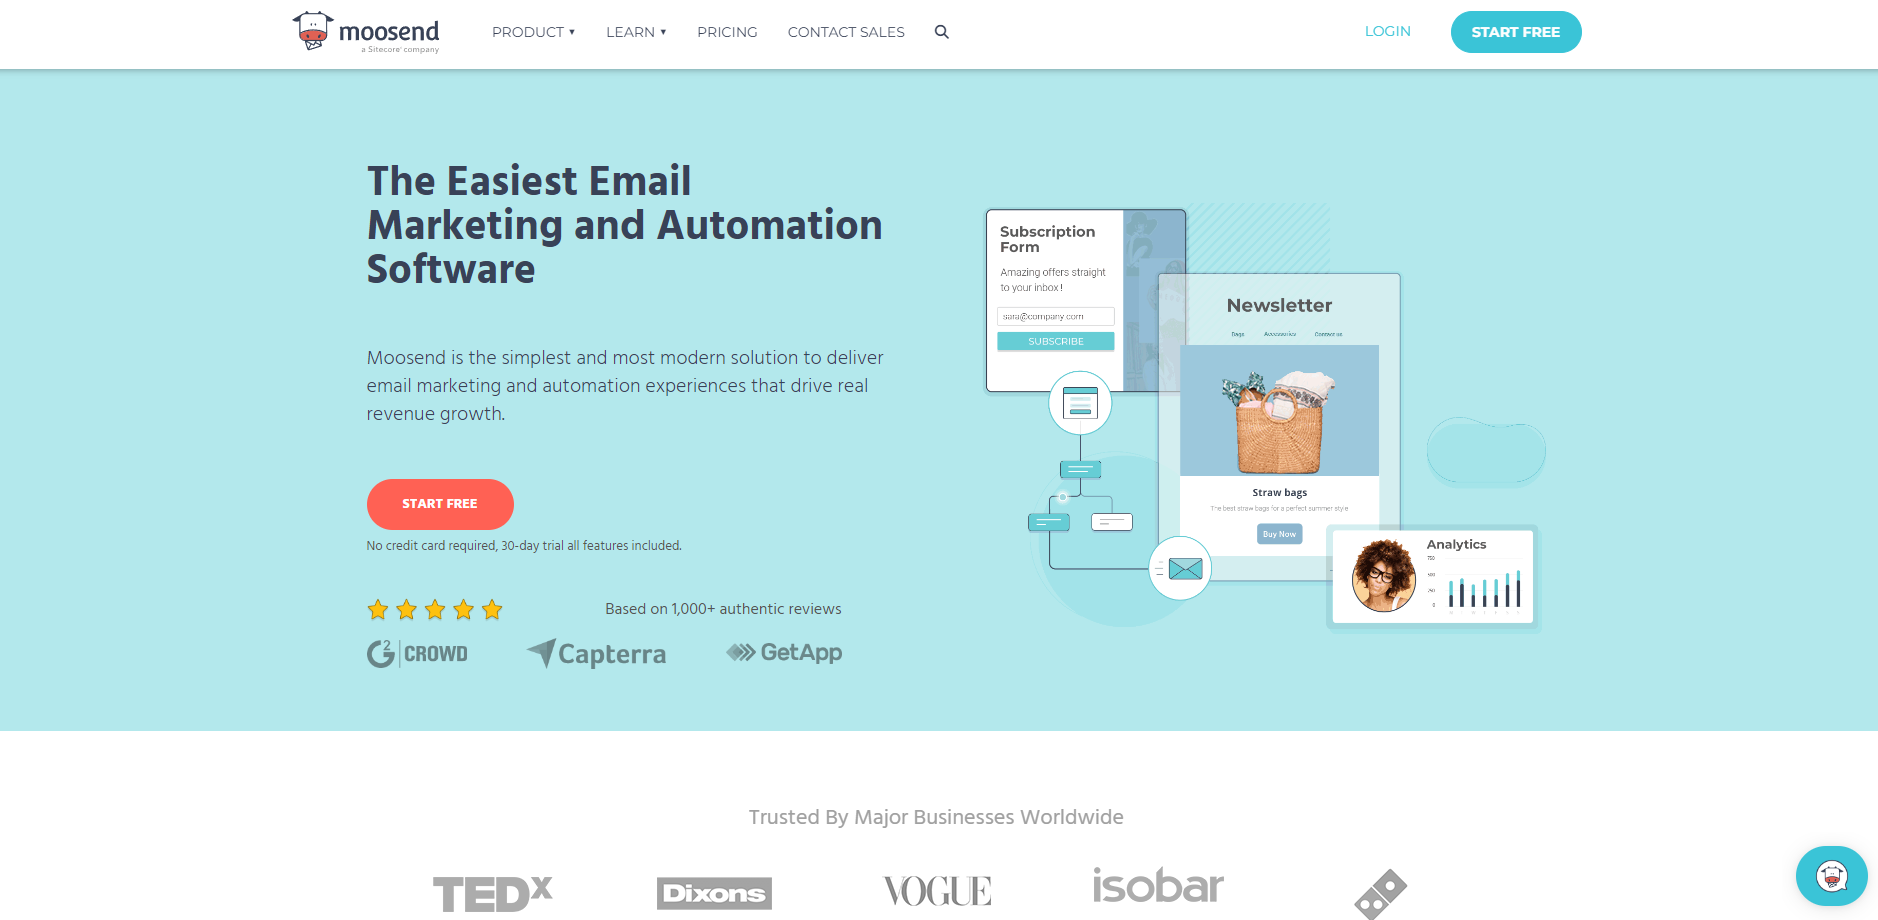 A screenshot of Moosend’s homepage showing their web copy as well as mock-ups of some of their email automation features.